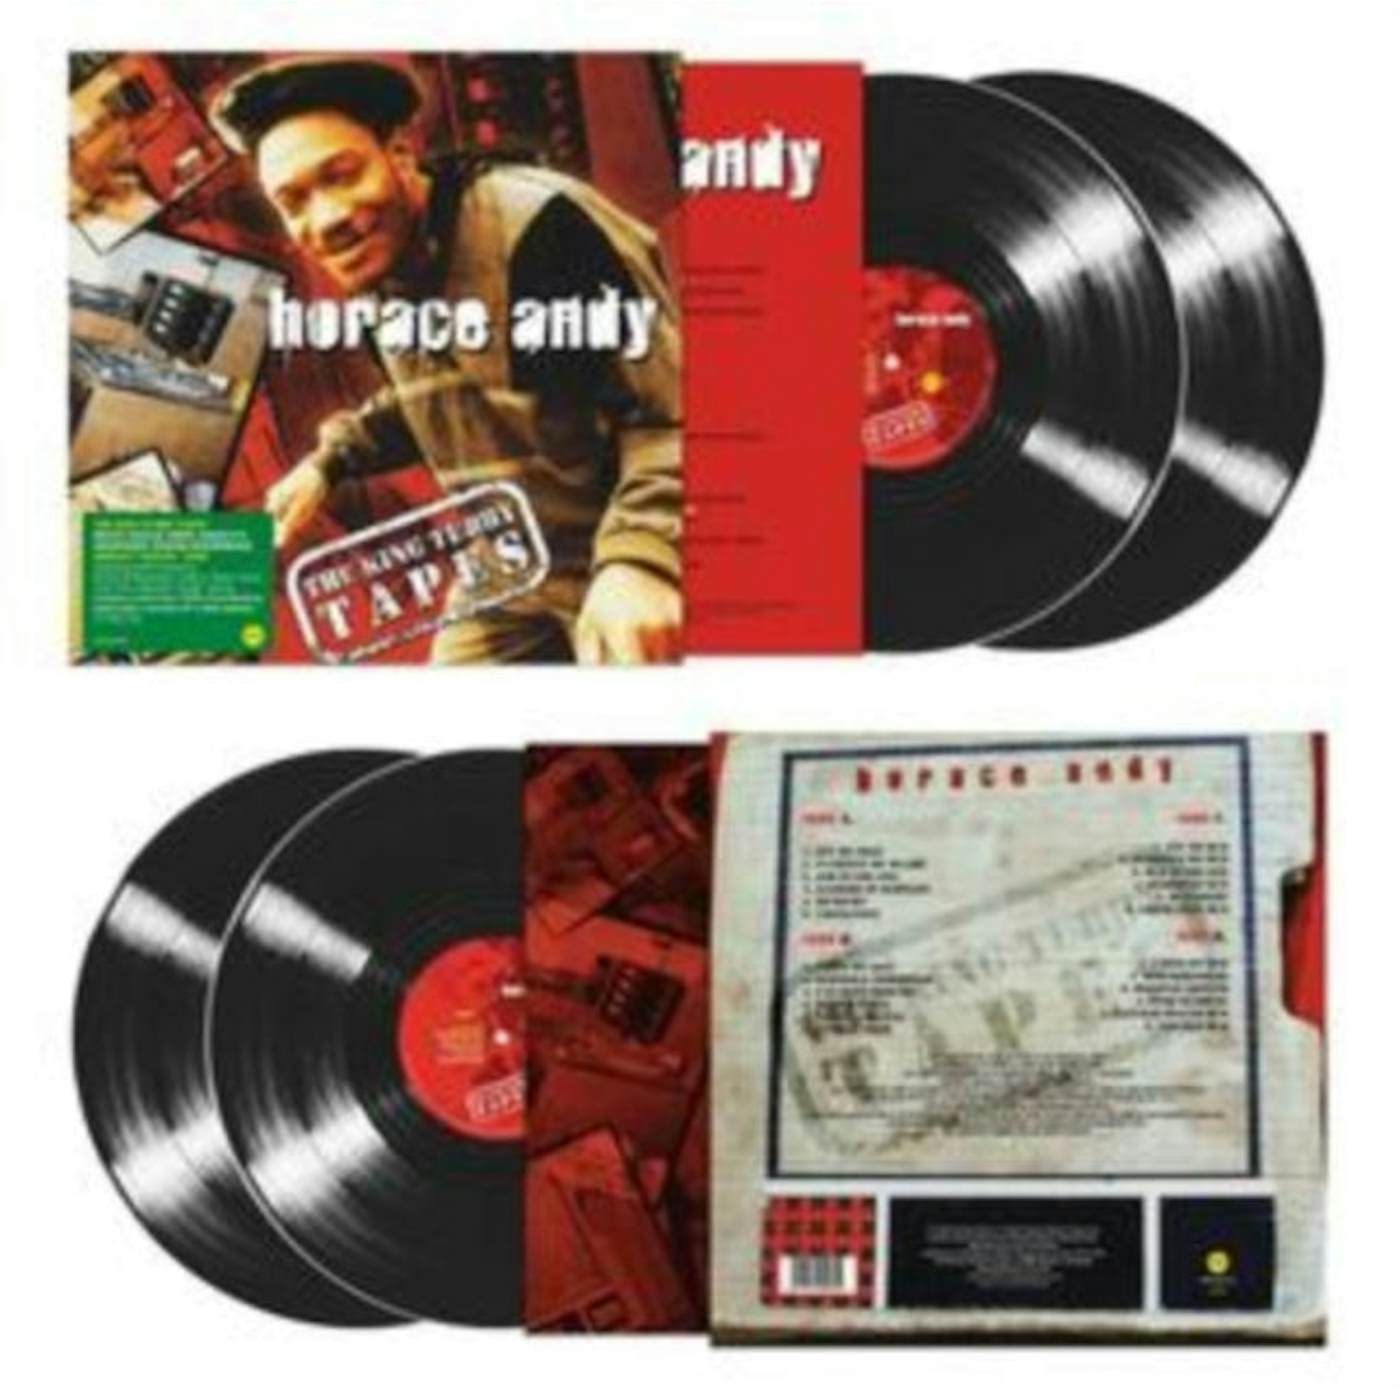 Horace Andy LP Vinyl Record - The King Tubby Tapes